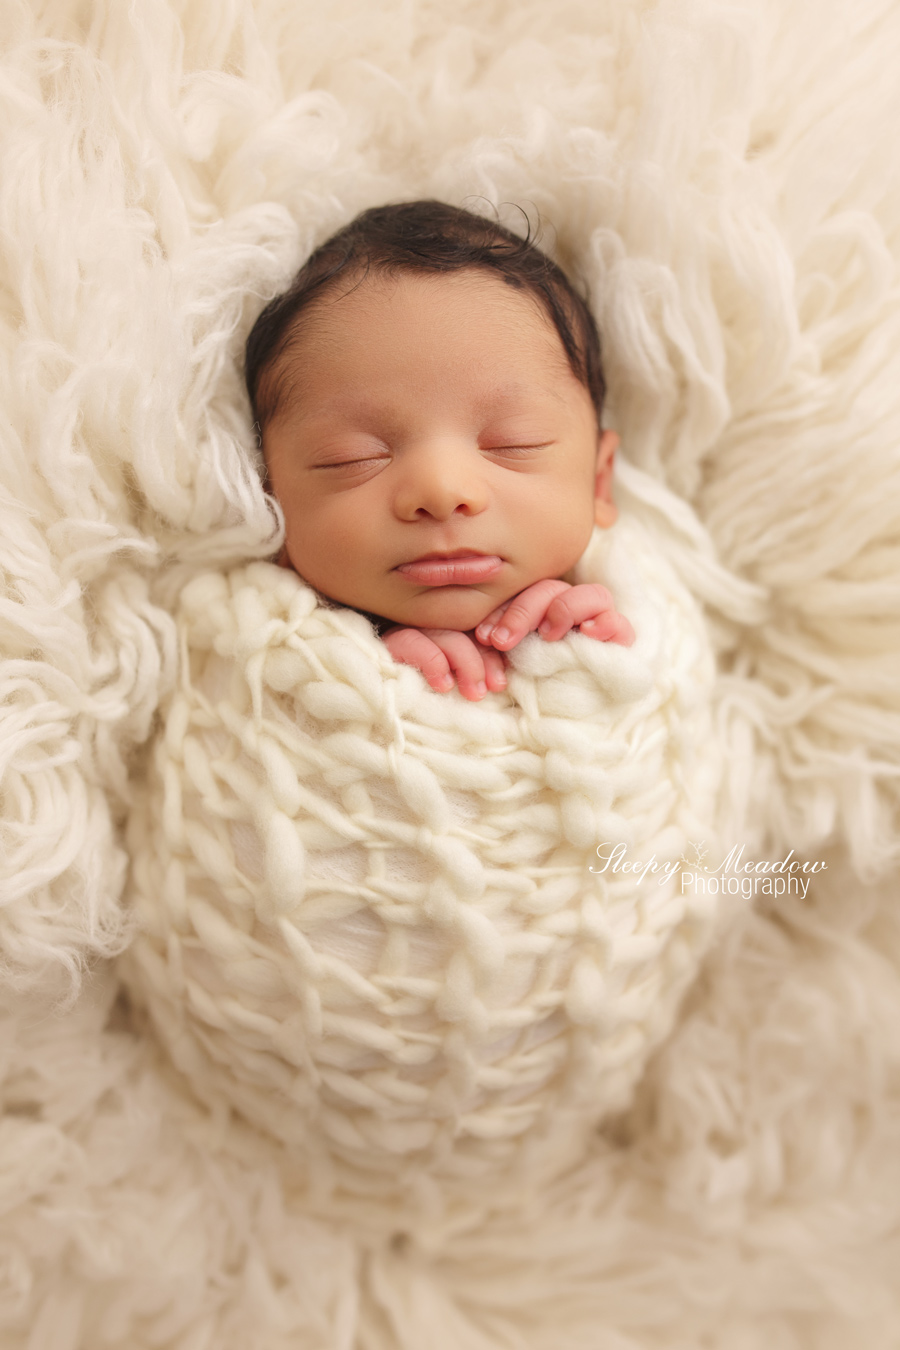 Baby snug as a bug for his newborn pictures with Sleepy Meadow Photography | Milwaukee Newborn Photographer